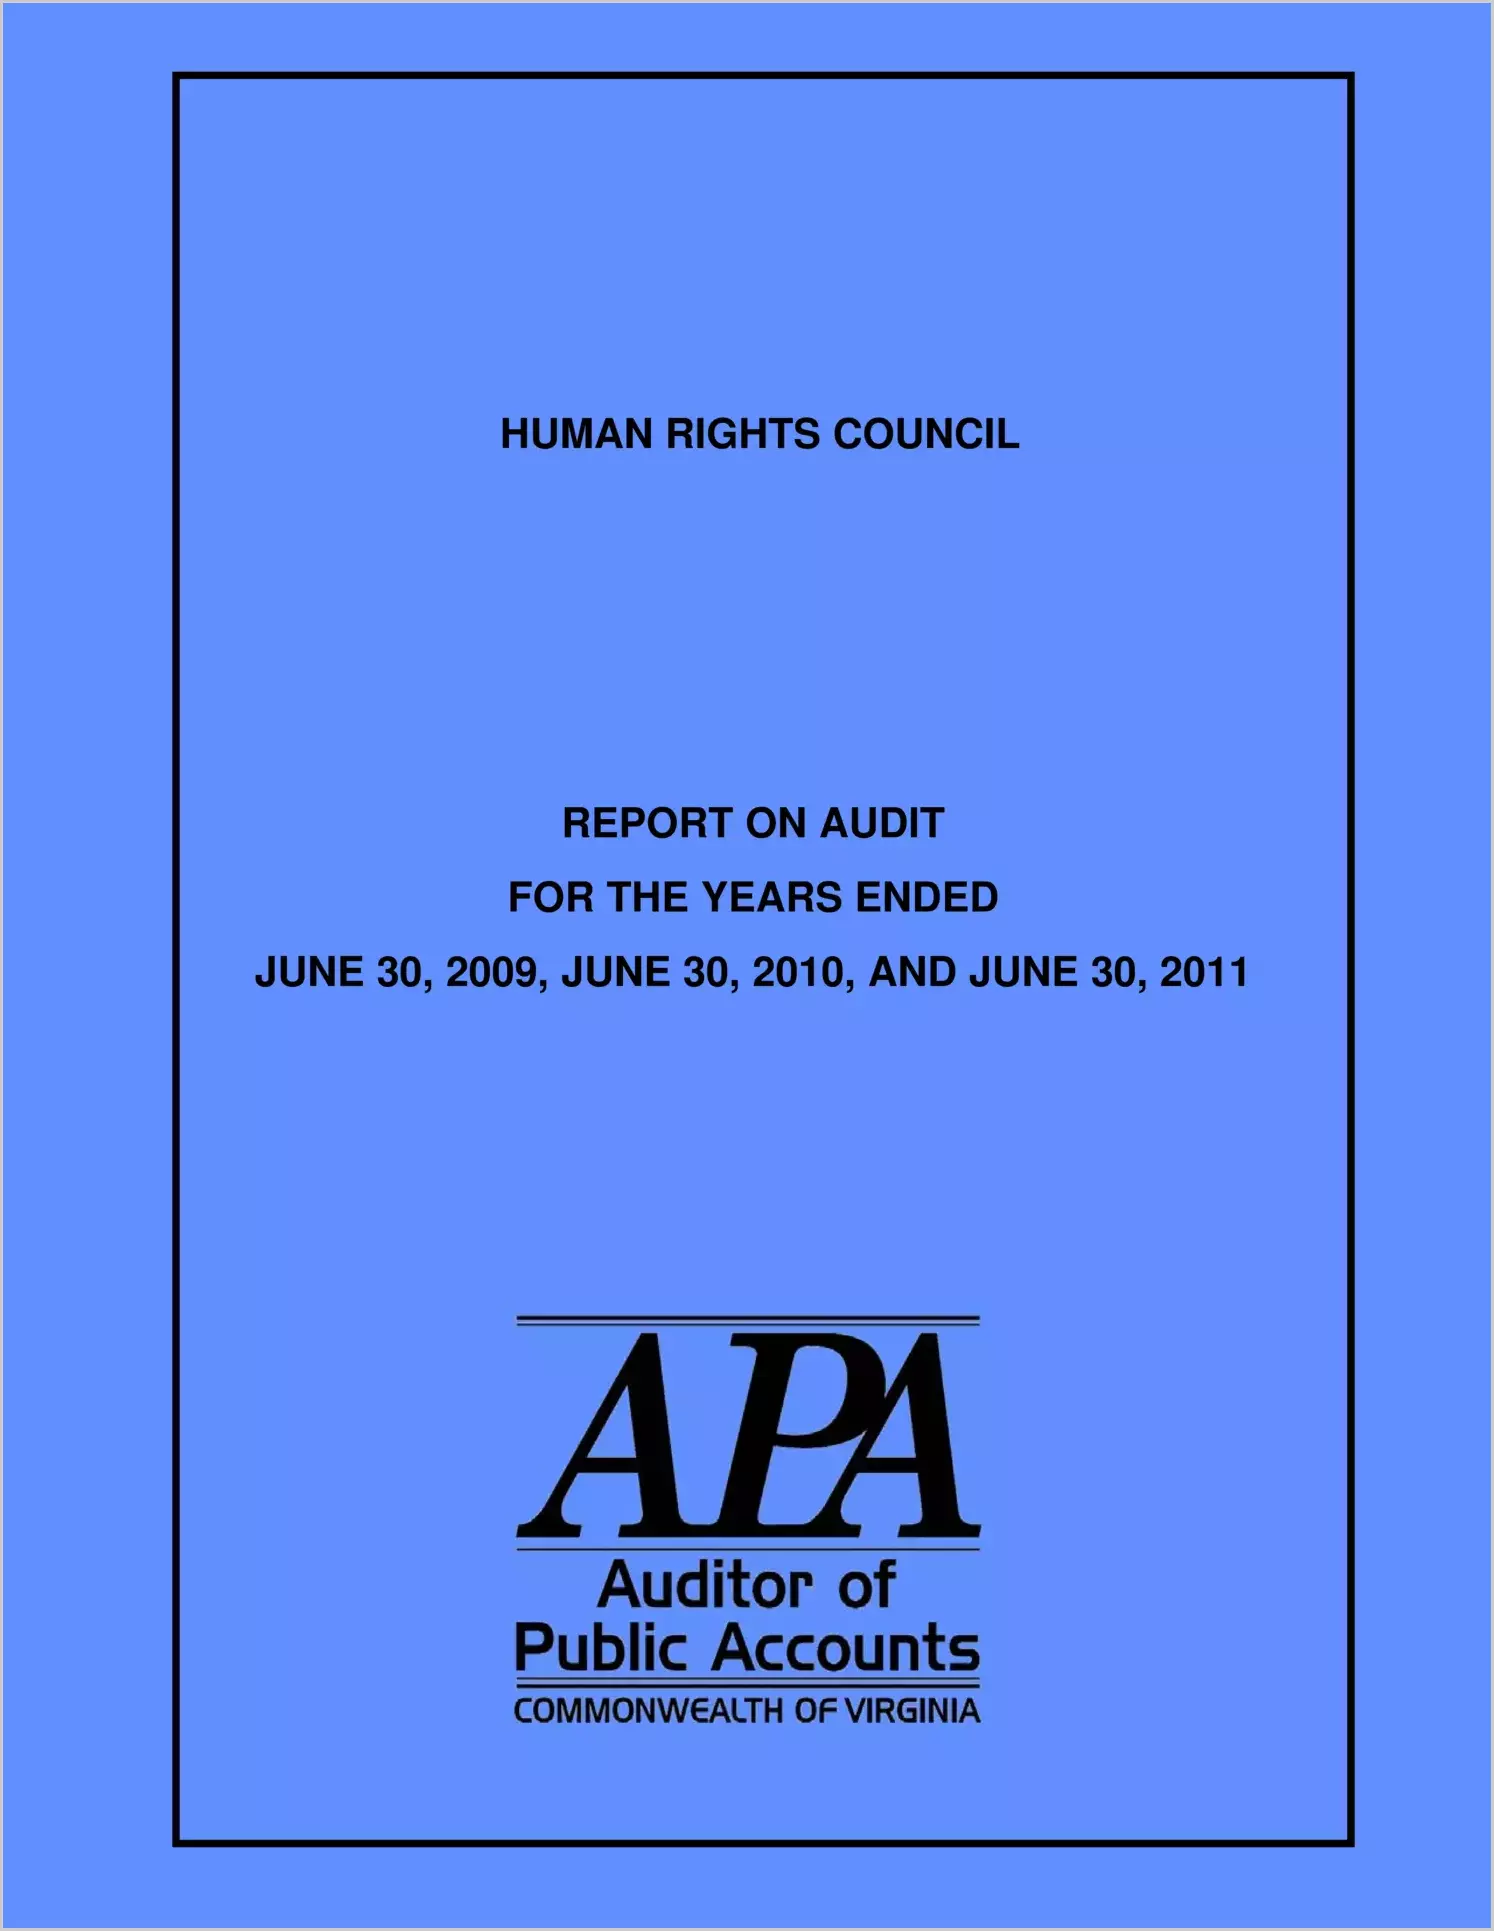 Human Rights Council for the years ended June 30, 2009 and June 30, 2011